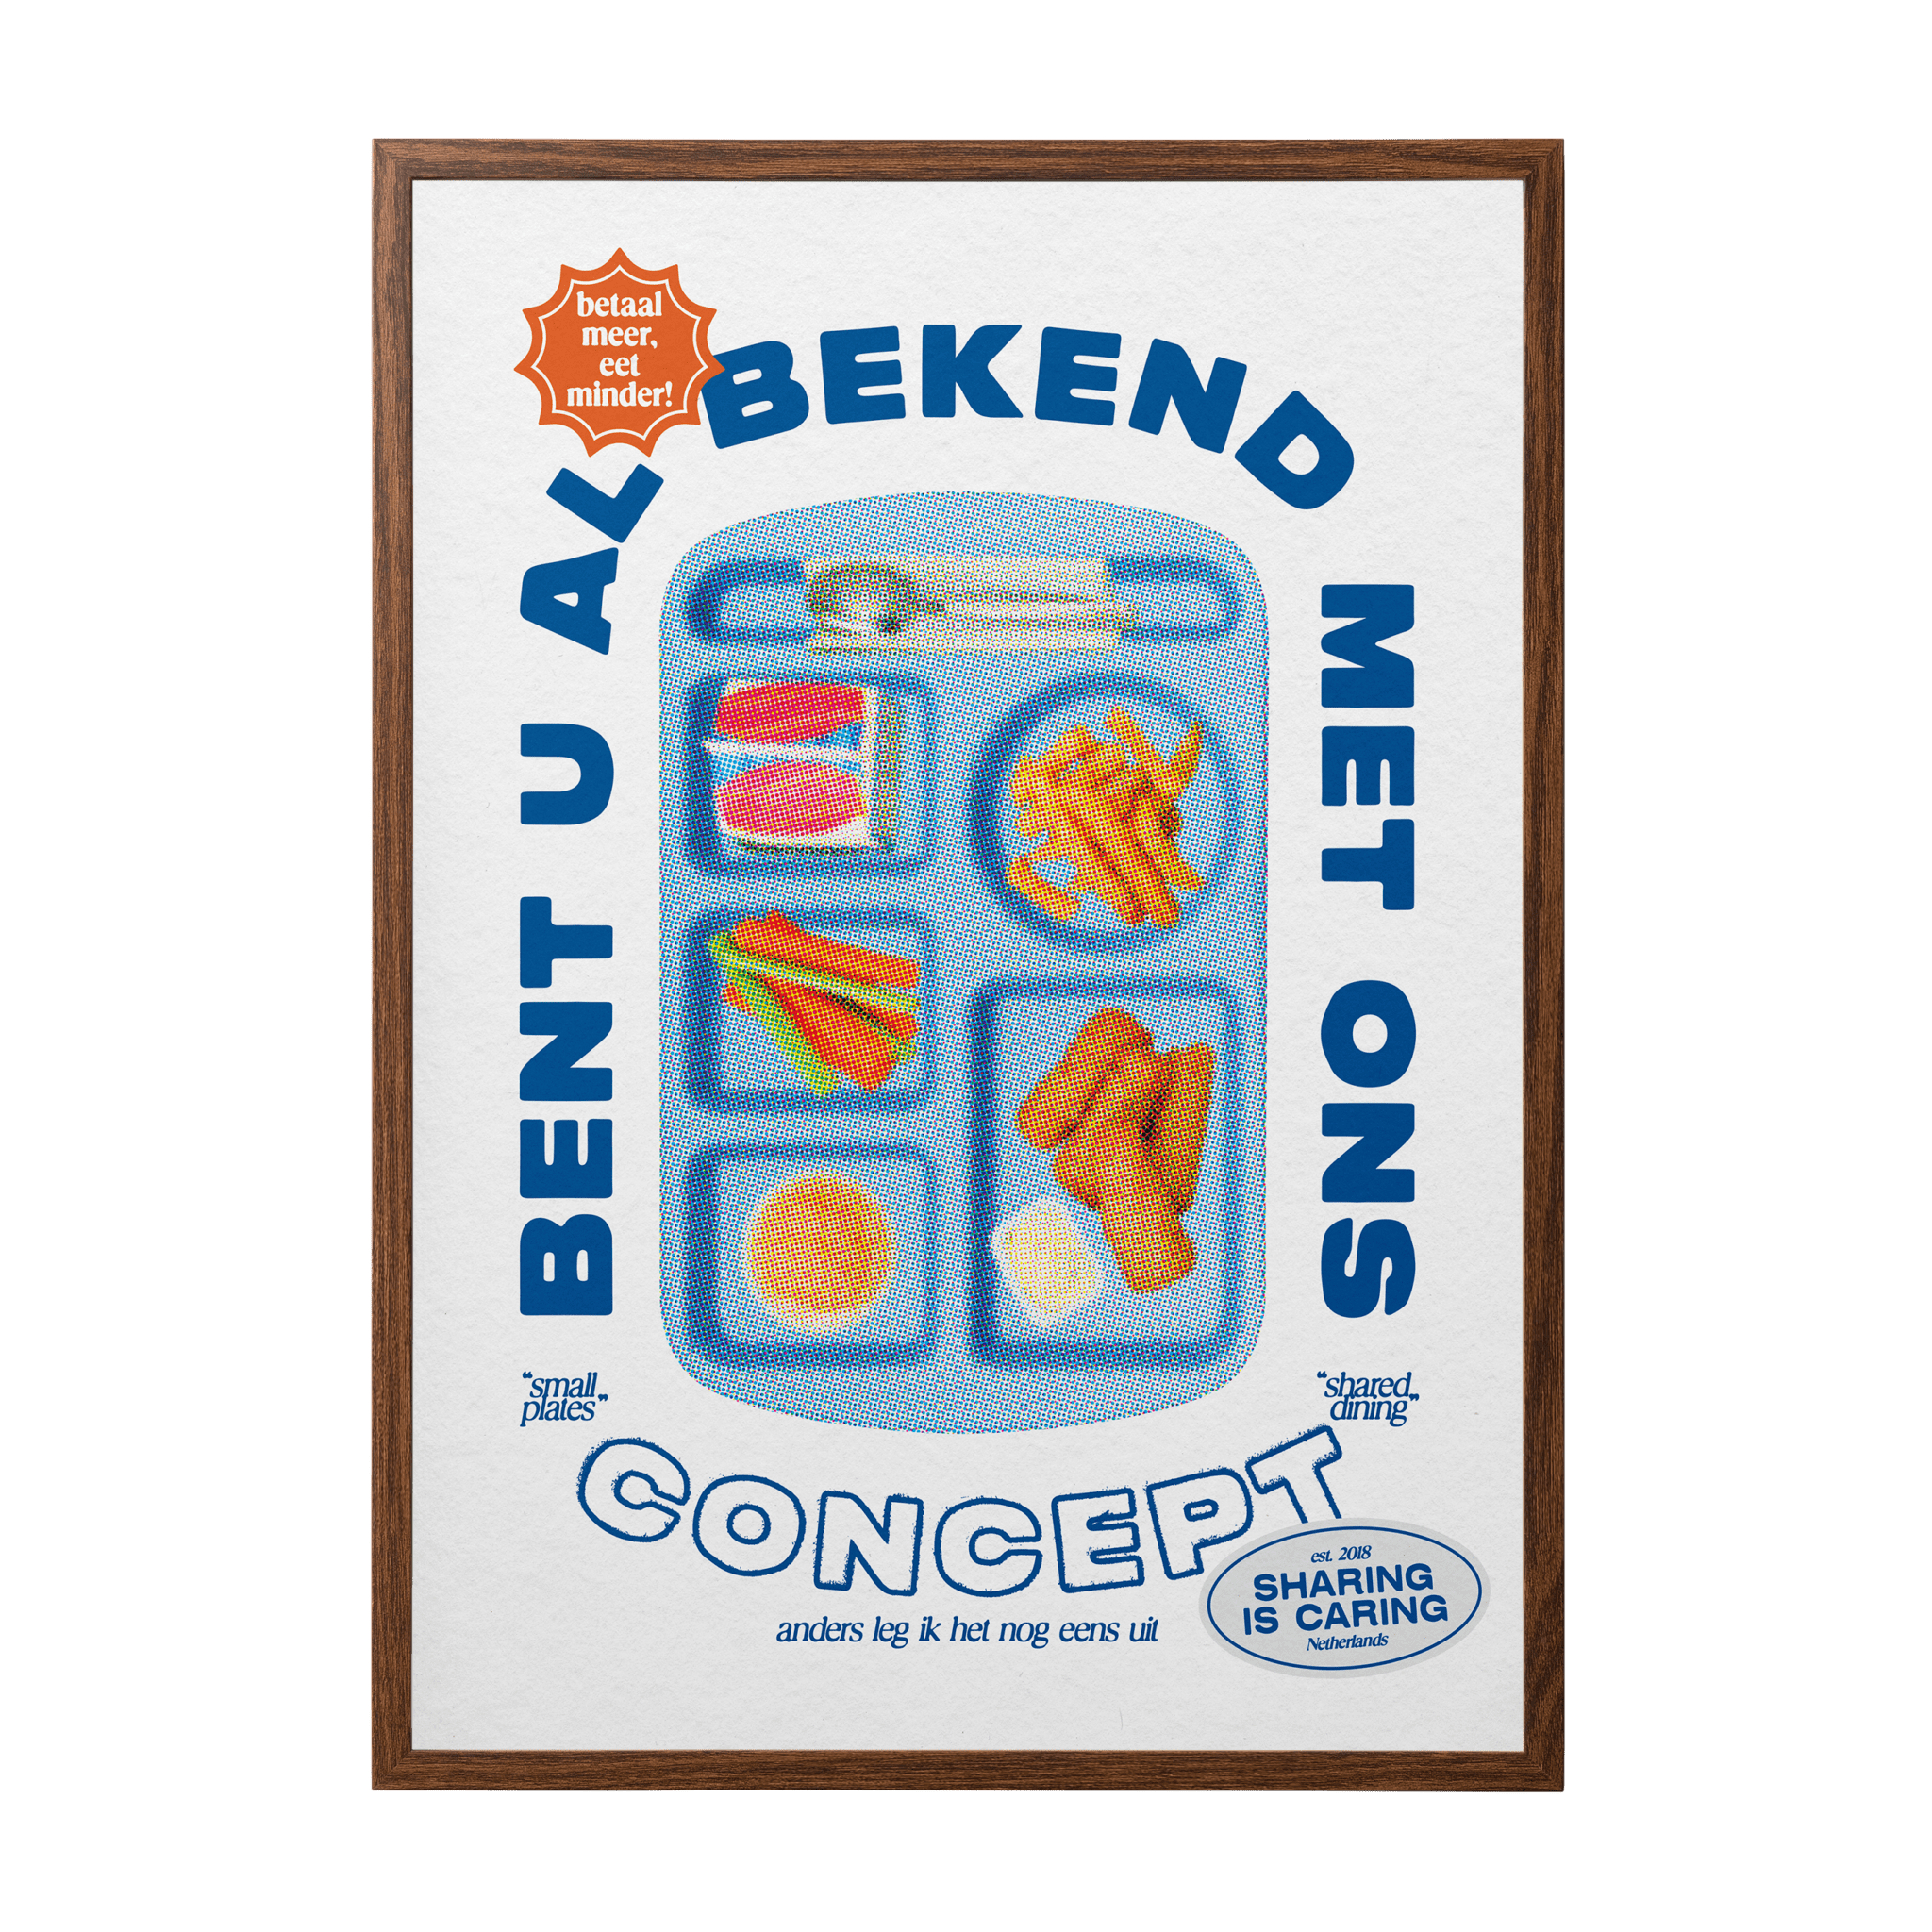 Poster in a frame displaying a pixelated food tray with the text "Bent u al bekend met ons concept?" and various stickers